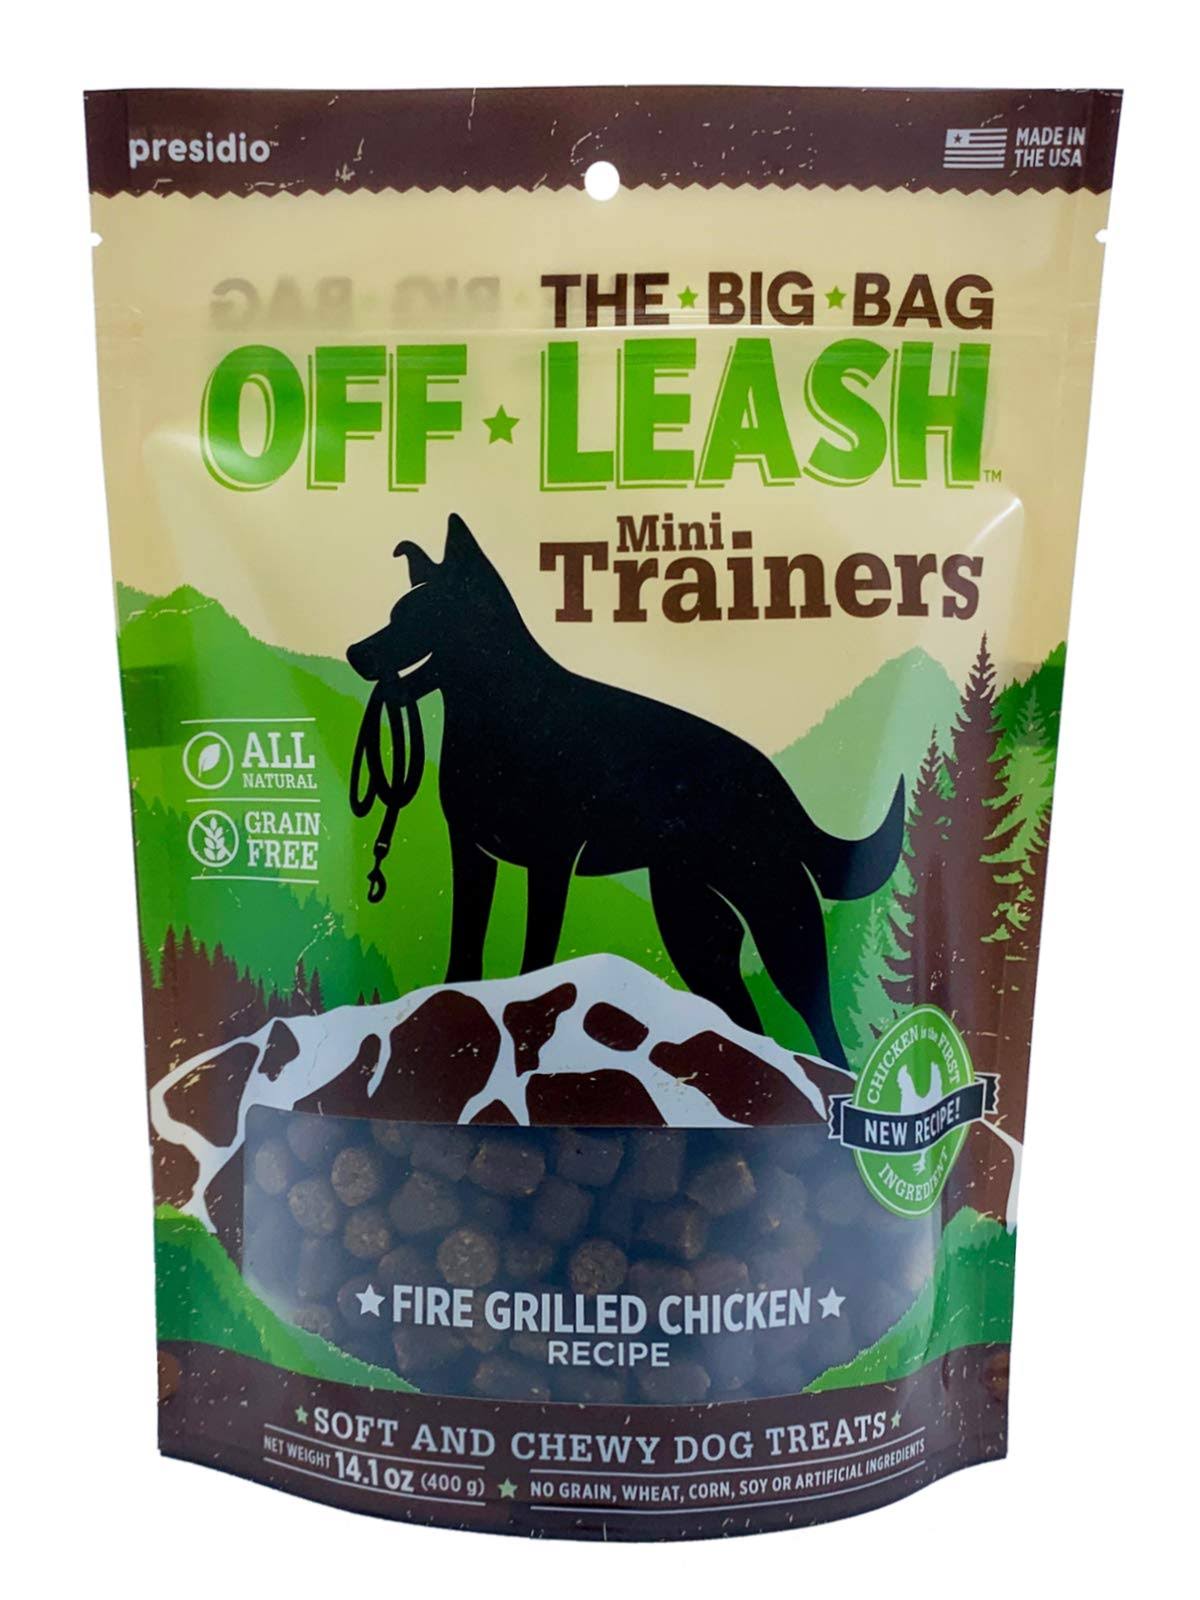 Off Leash Grilled Chicken Mini Trainers 14 oz.